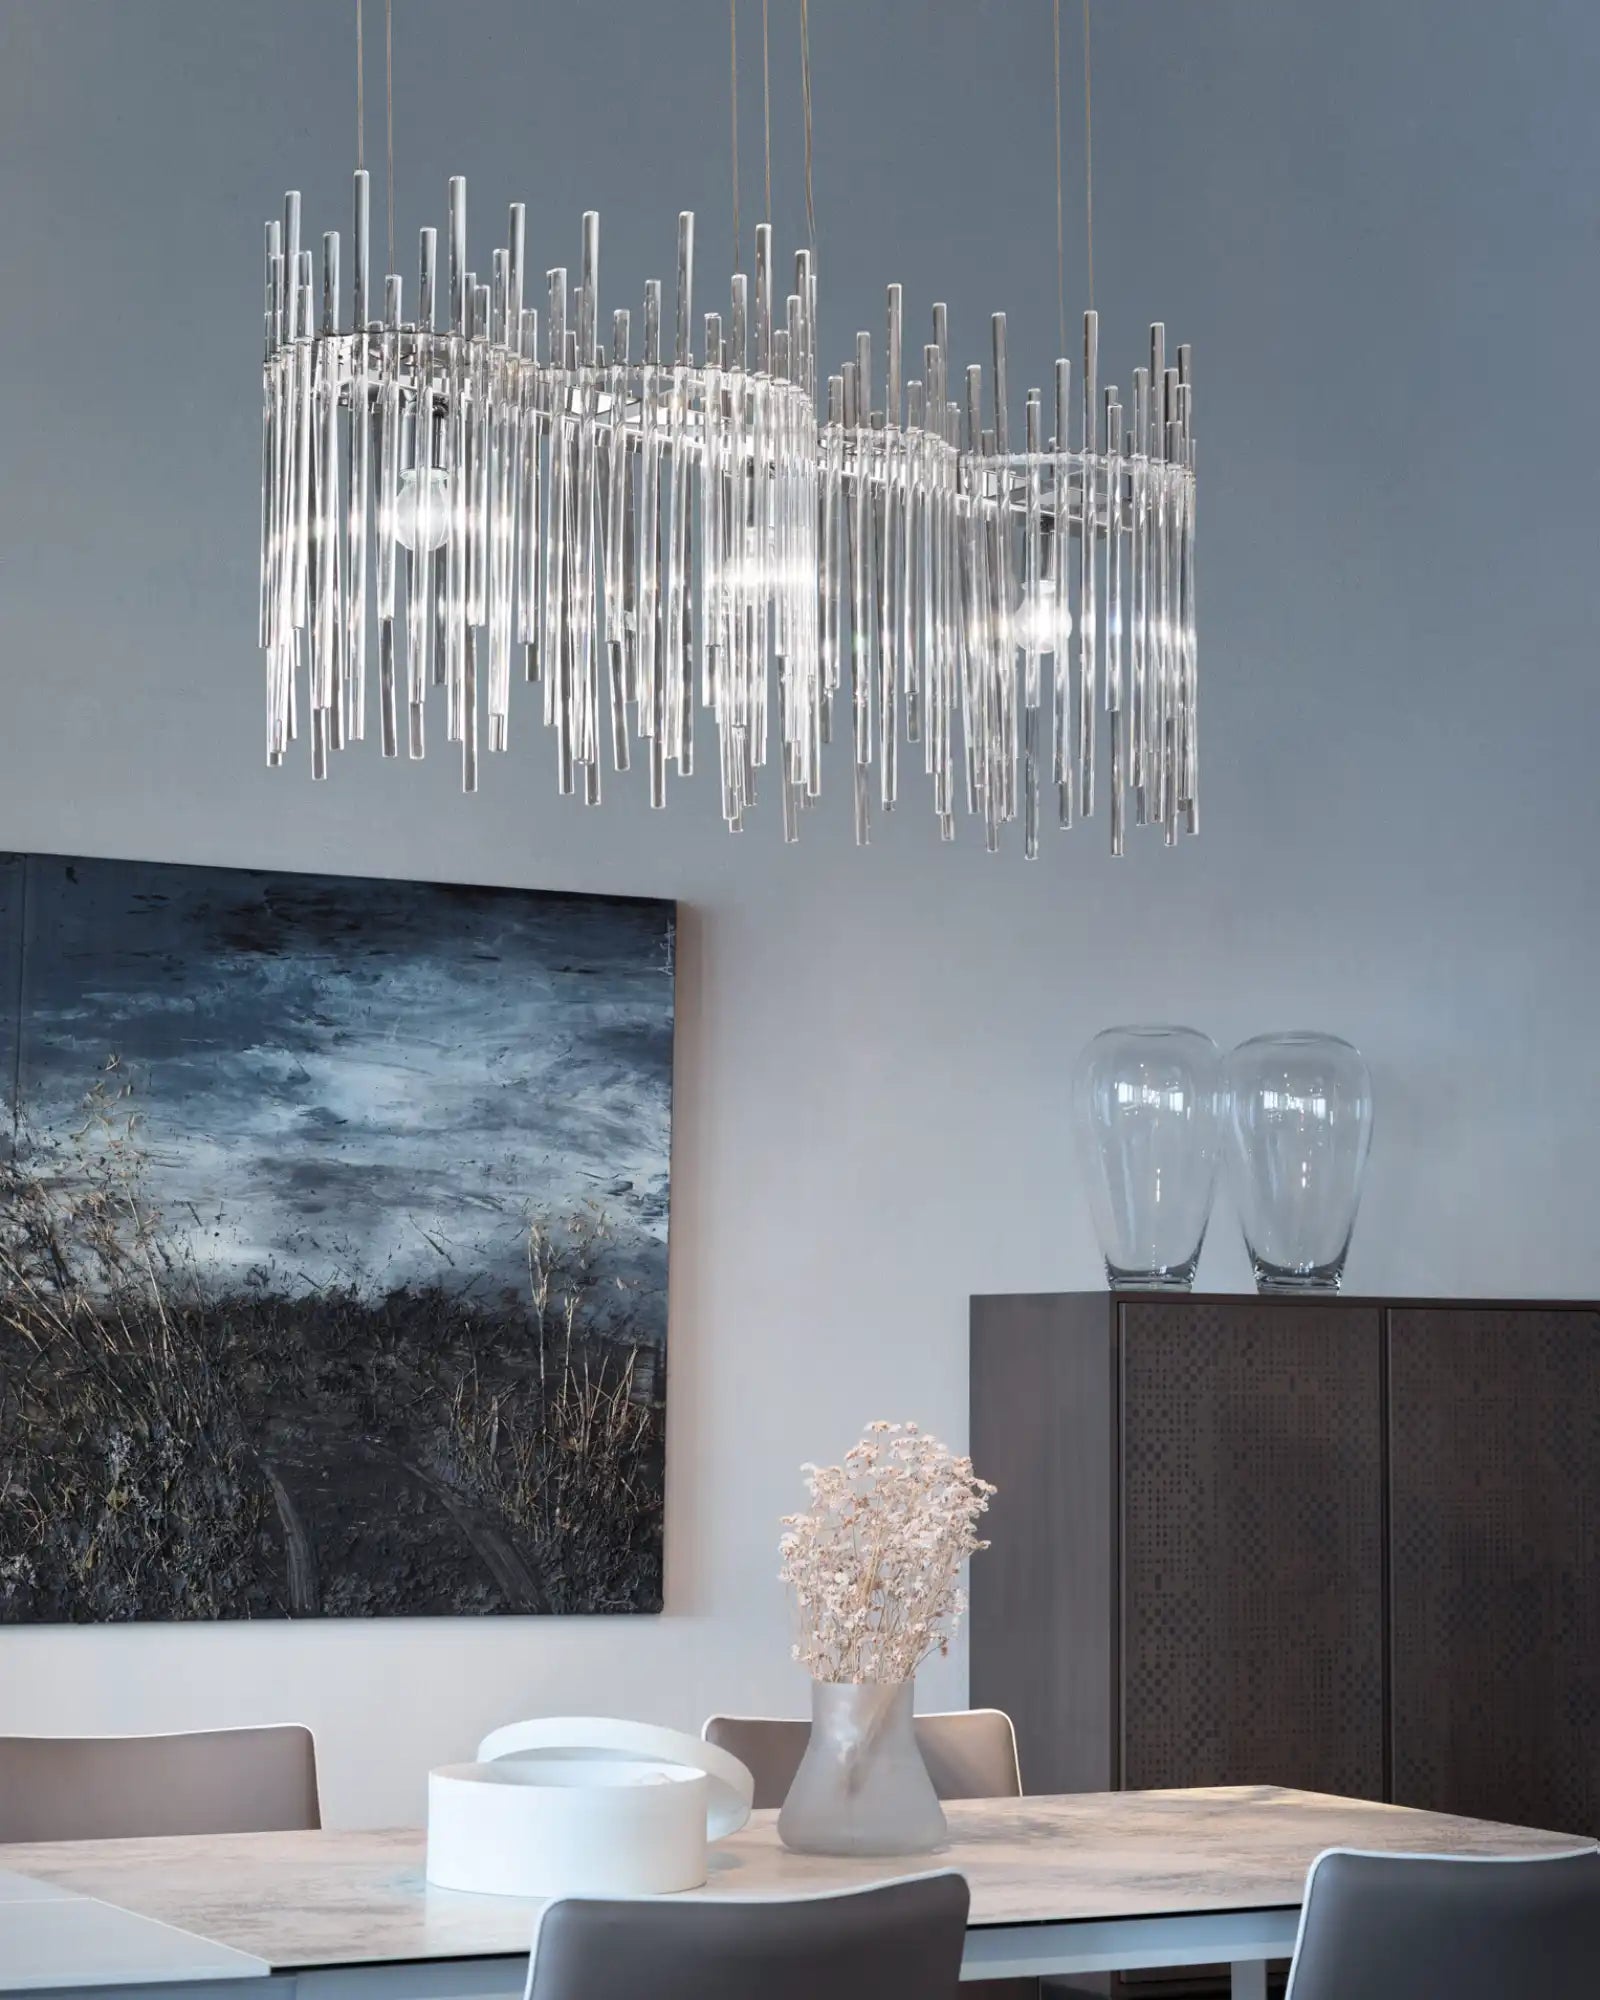 Vistosi Lighting Diadema K3 Chandelier featured within a contemporary dining | Nook Collections